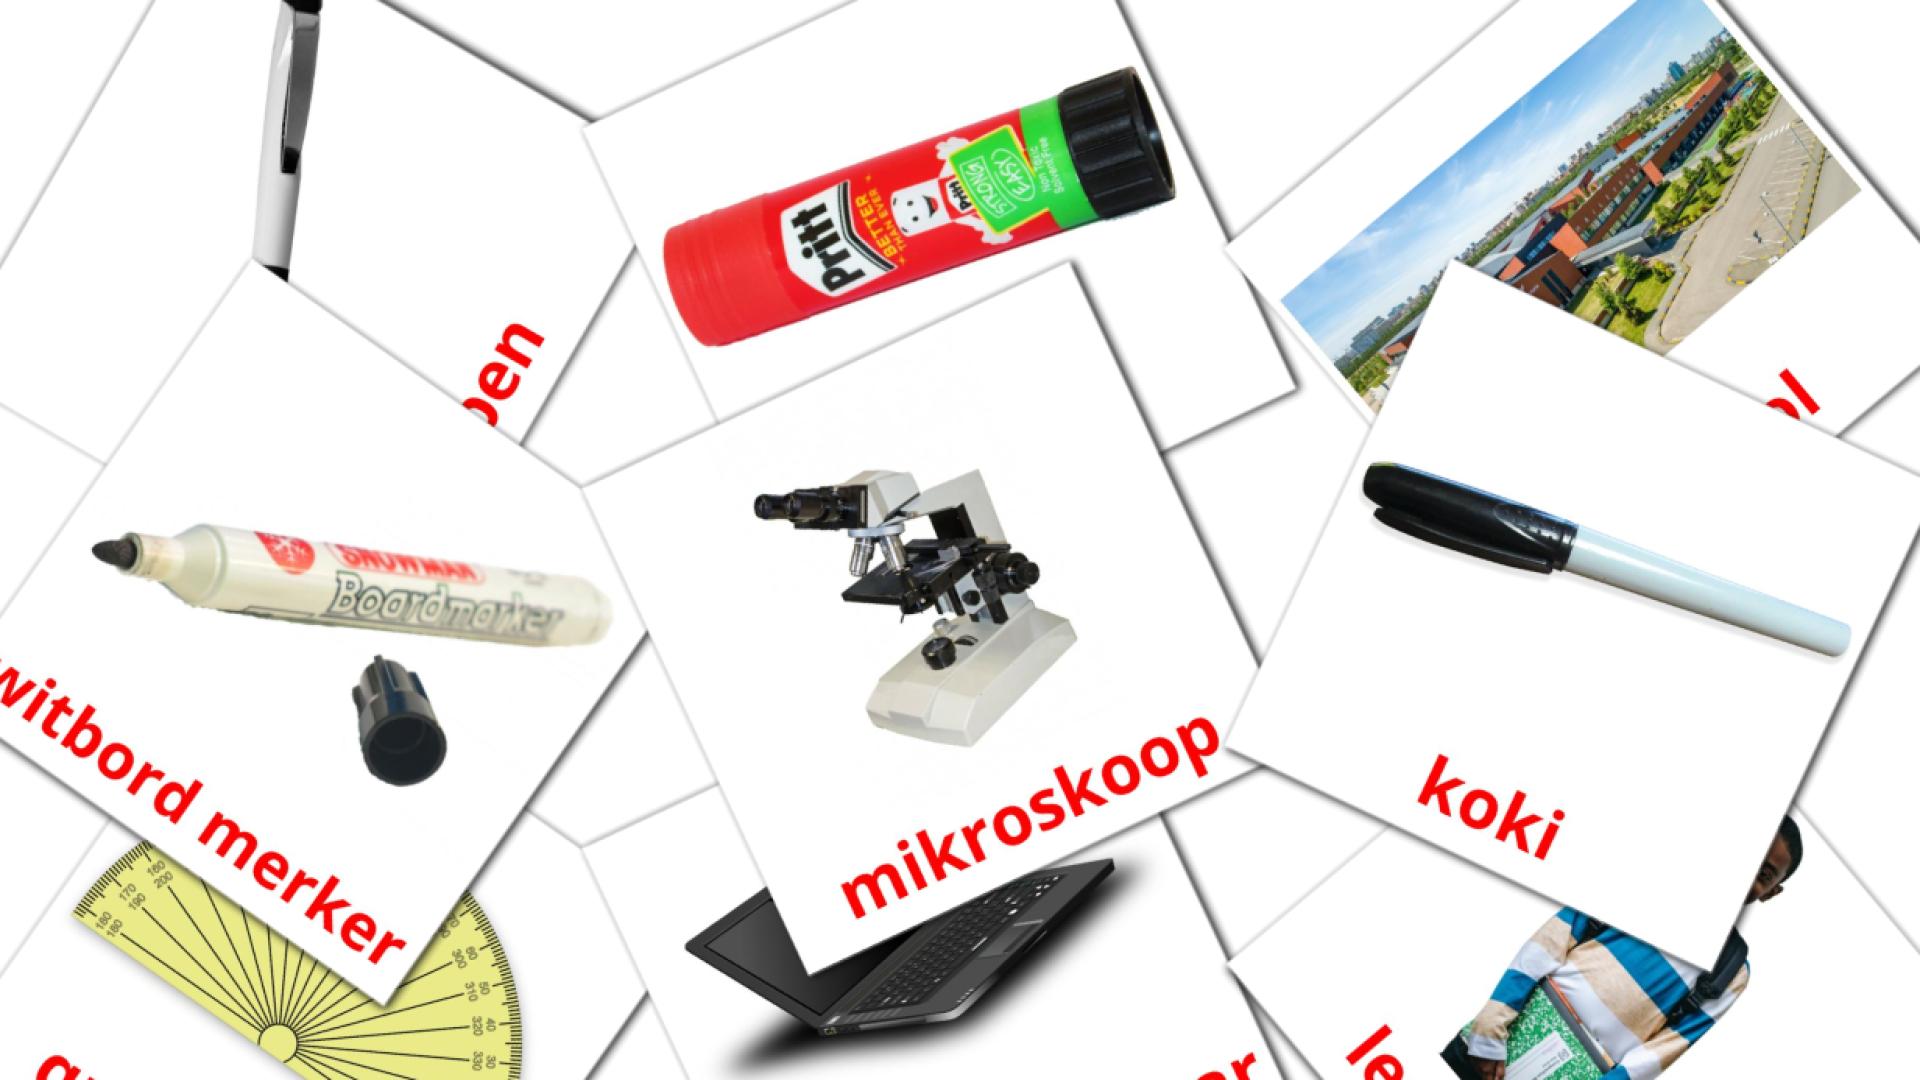 Classroom objects - afrikaans vocabulary cards